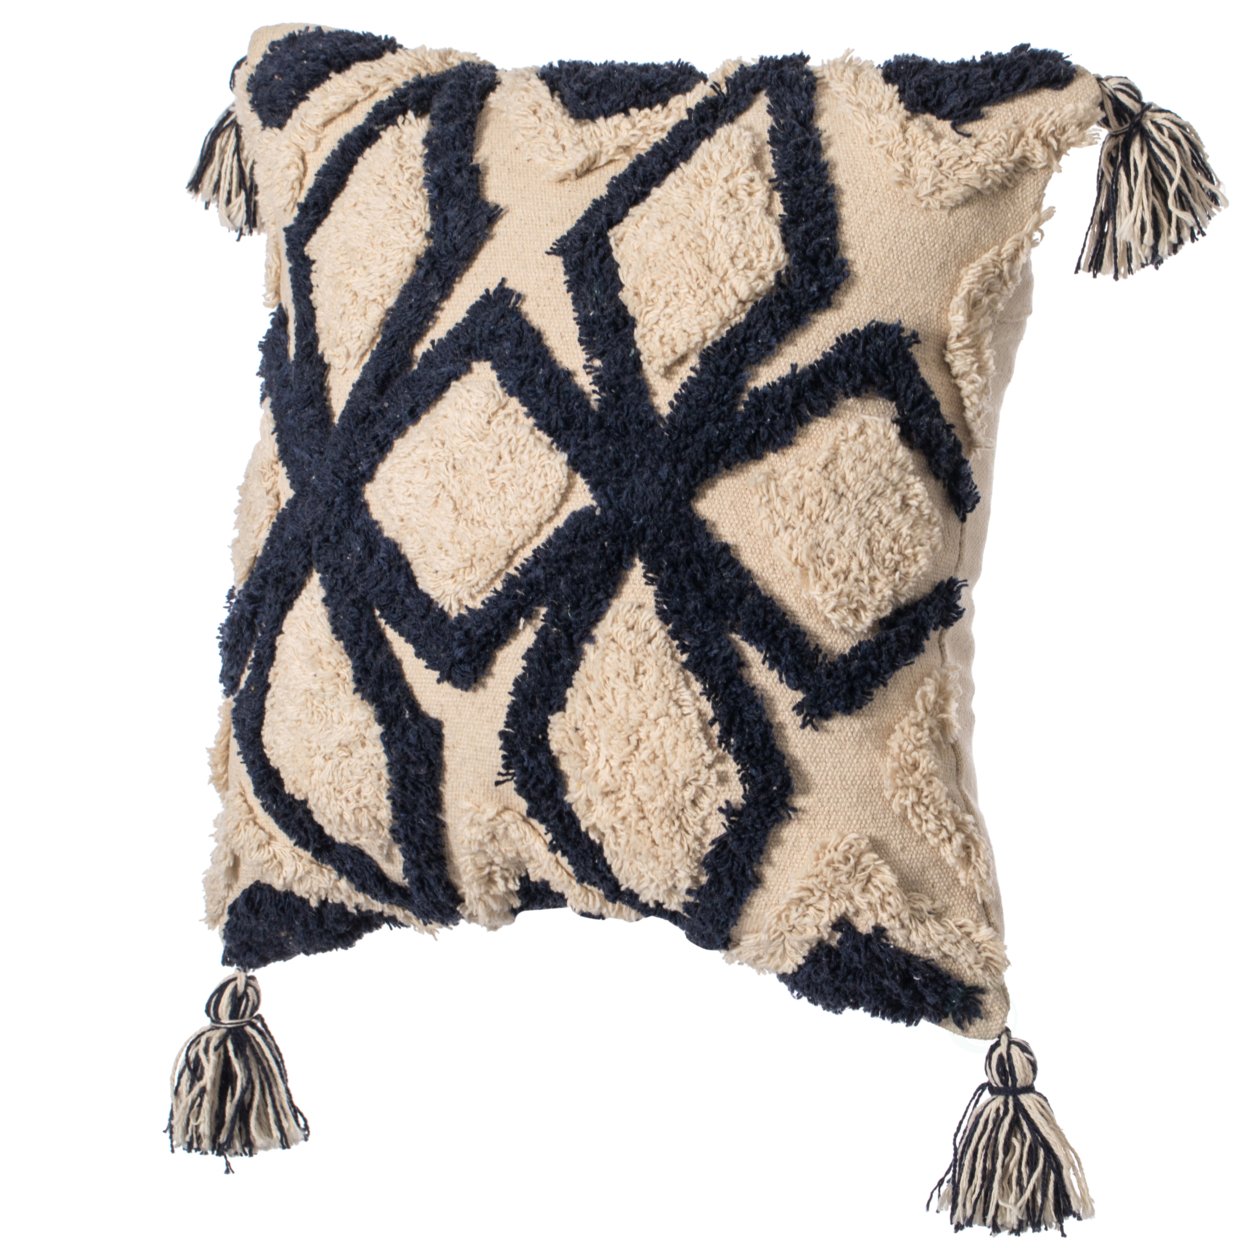 16 Handwoven Cotton Throw Pillow Cover With Tufted Designs And Side Tassels - Tribal